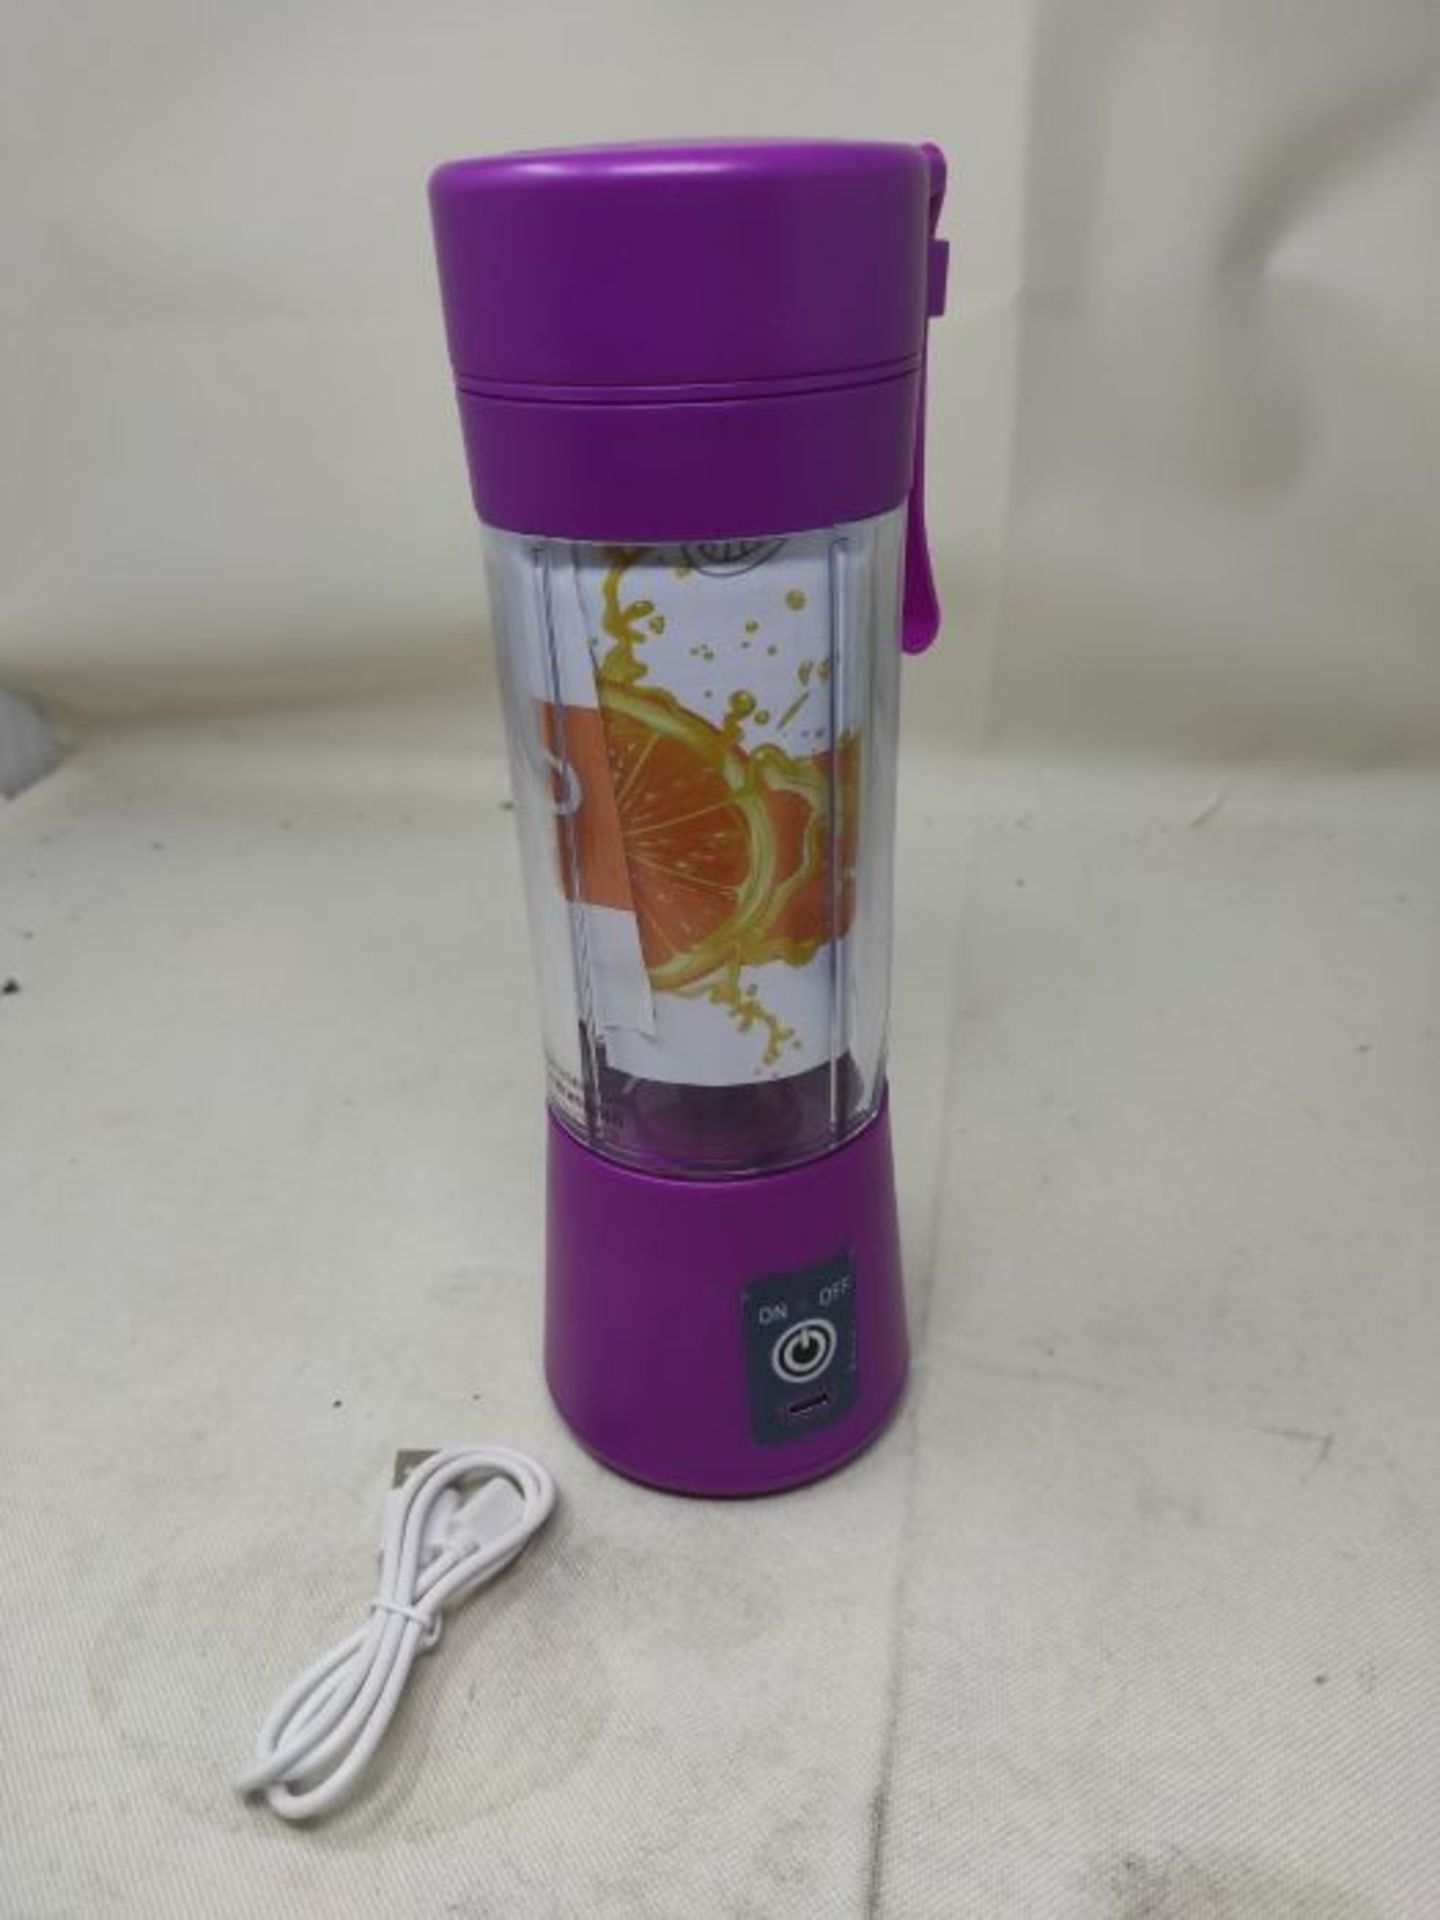 [CRACKED] Portable Blender Cup,Electric USB Juicer Blender,Mini Blender Portable Blend - Image 3 of 3